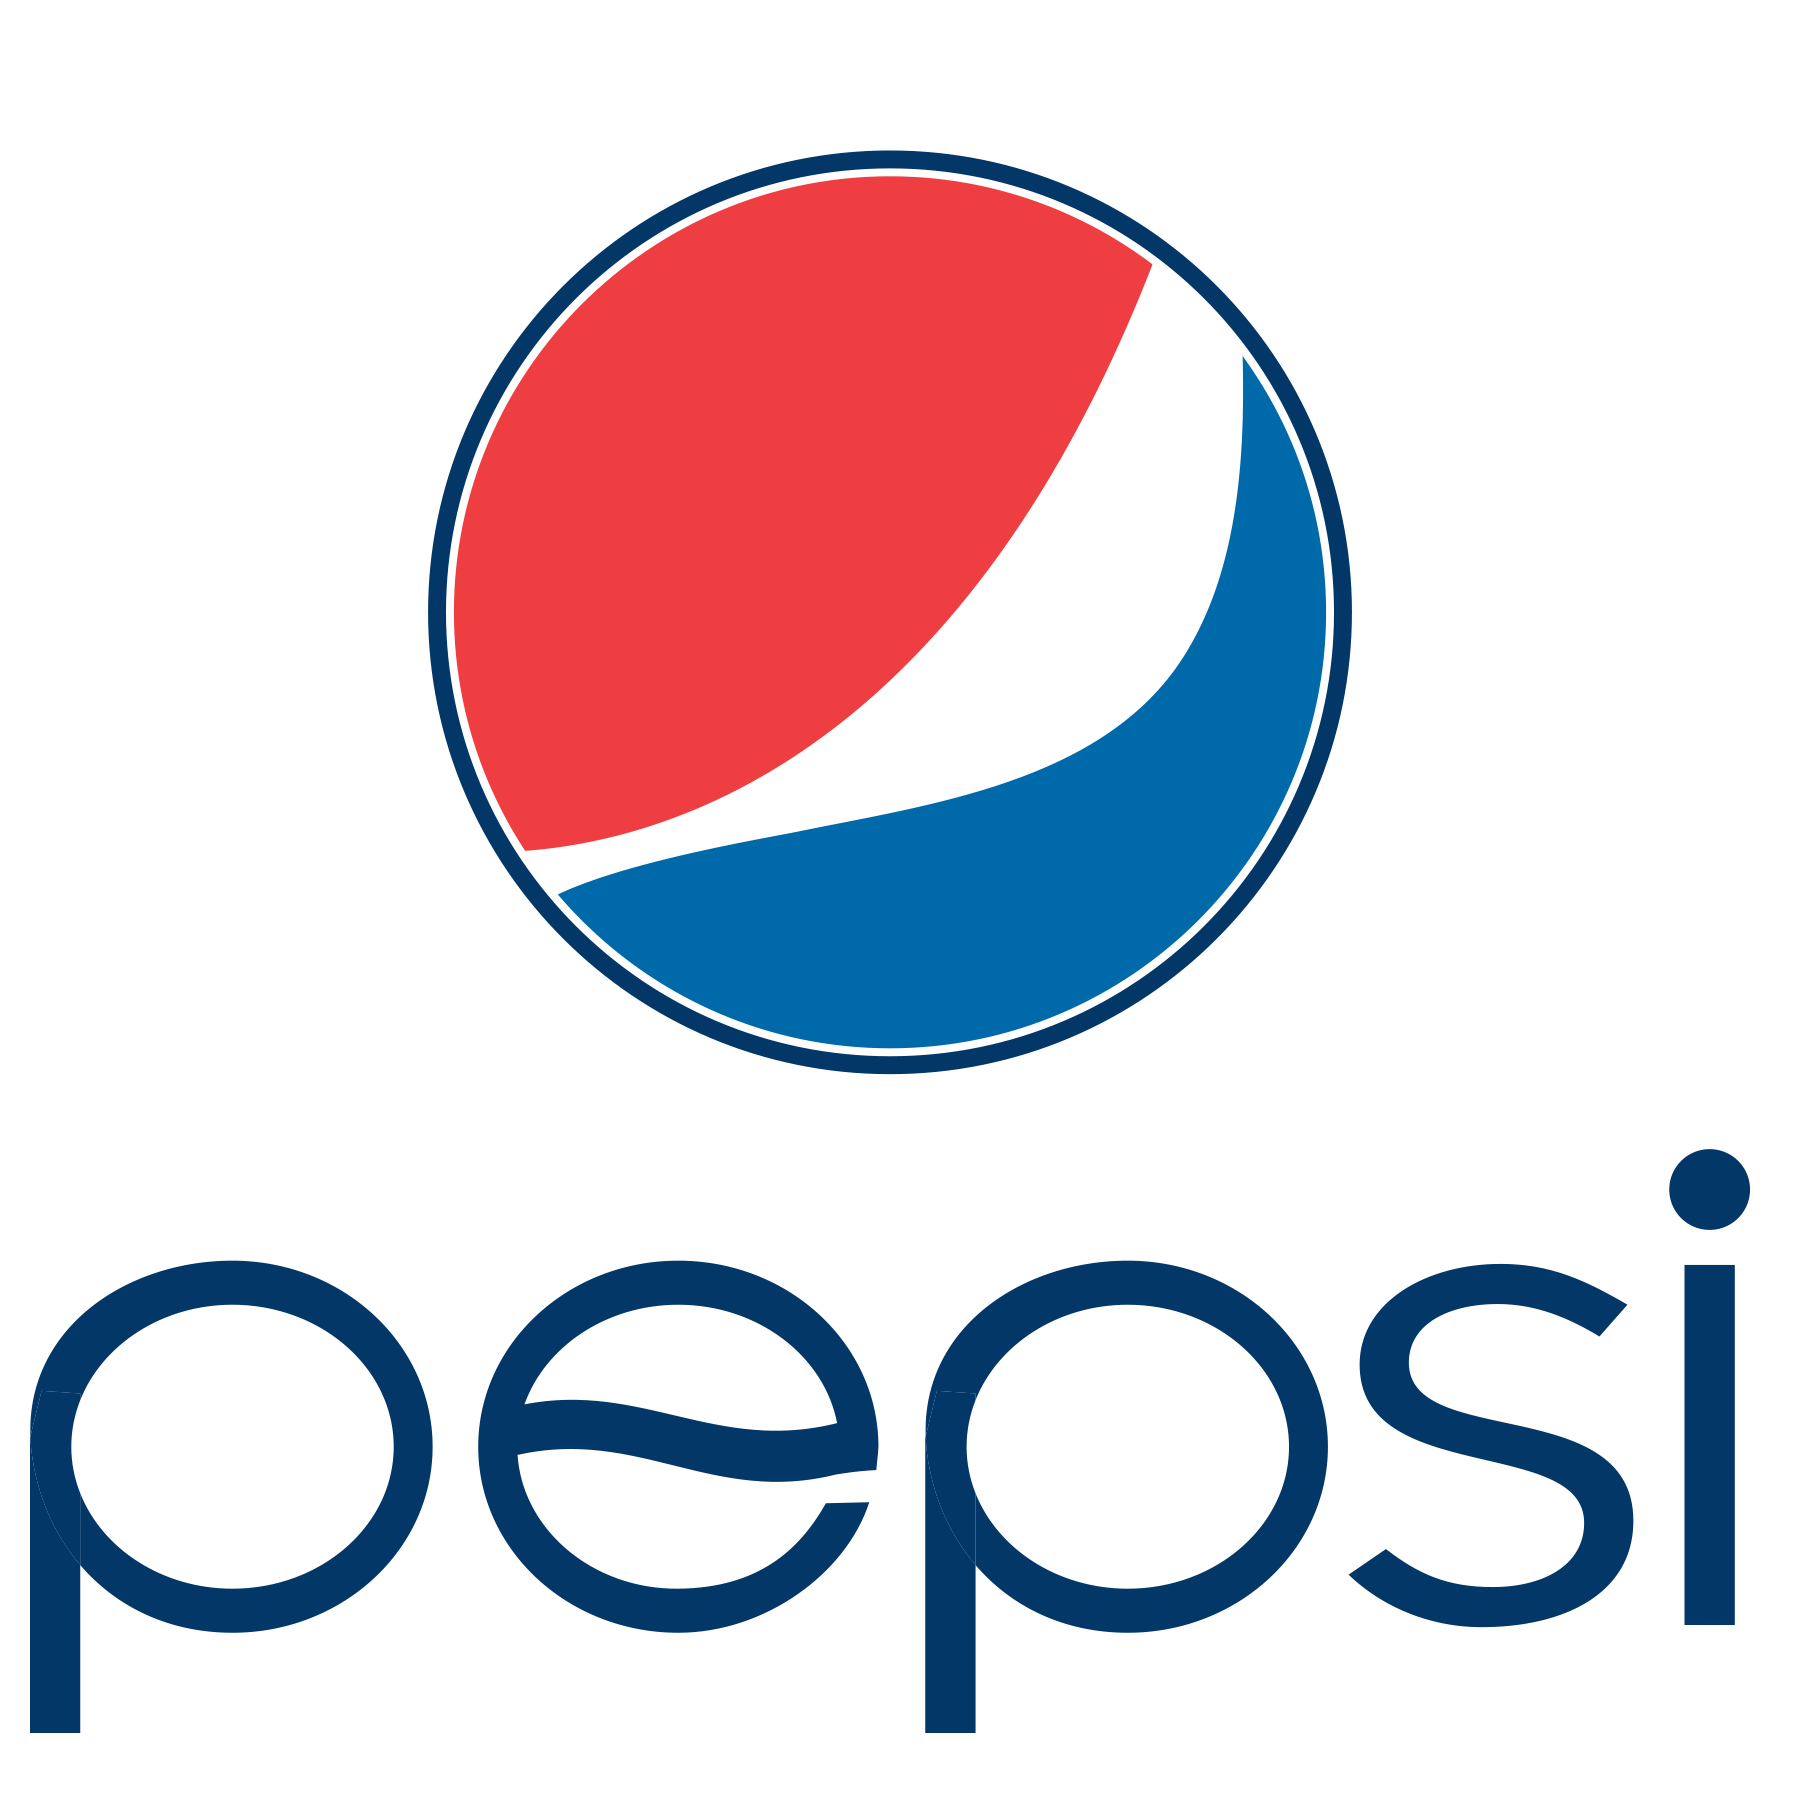 kisspng-pepsi-globe-coca-cola-logo-portable-network-graphi-5c5369cdd7d8b6.2995682815489704458841 May the 4th be with you 5k